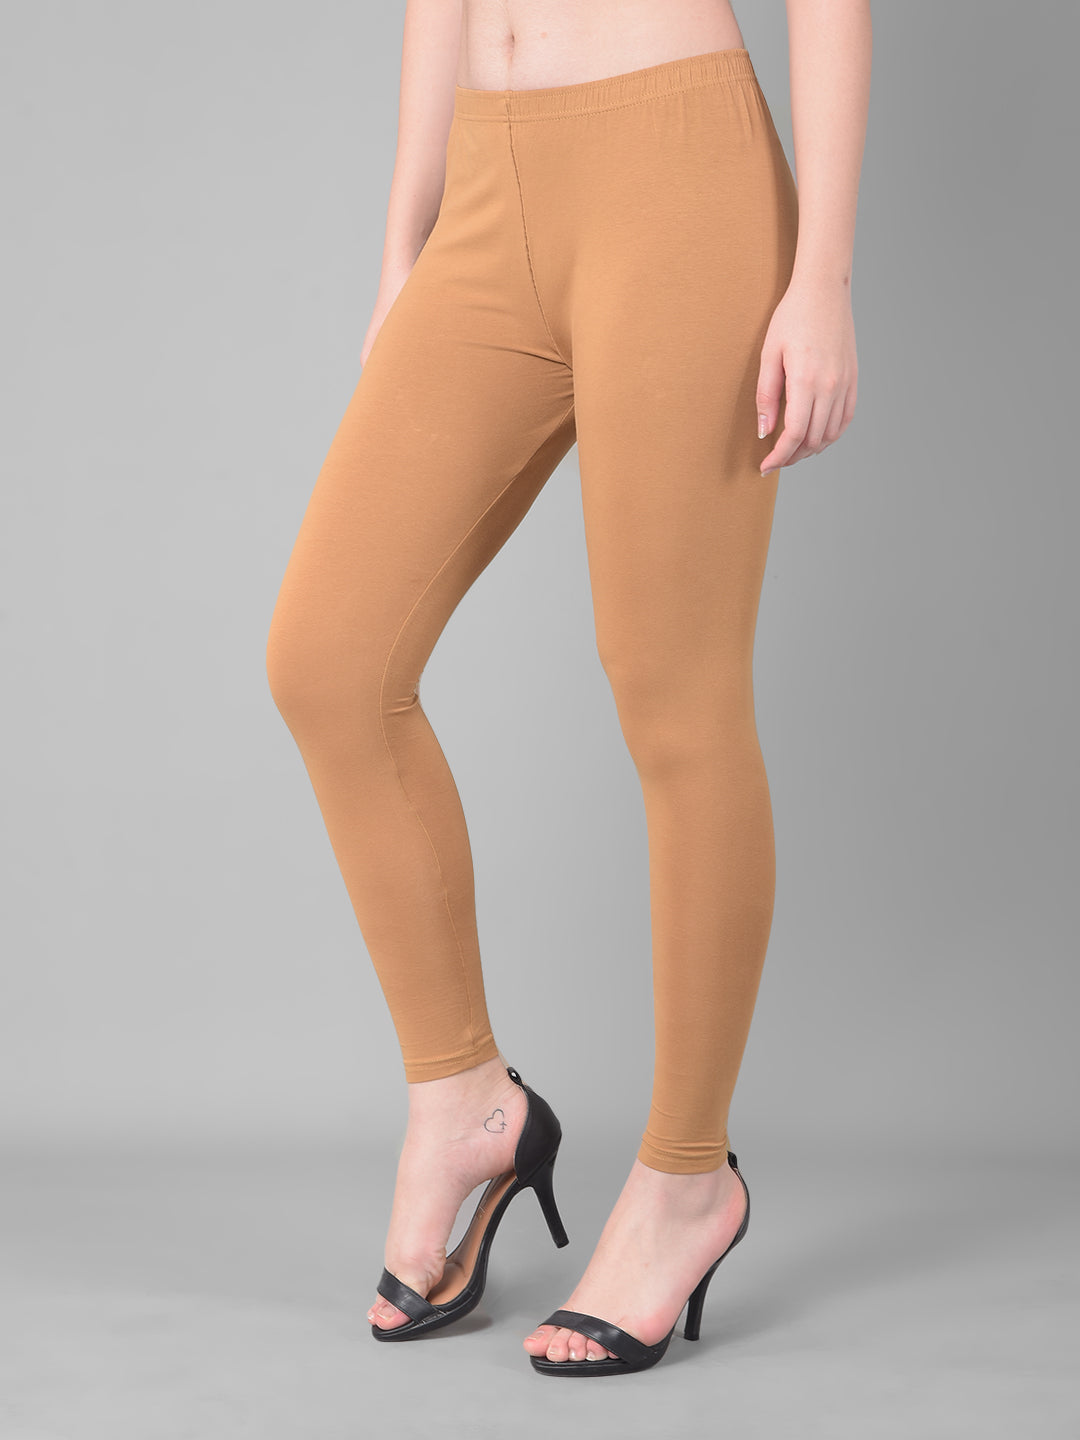 Comfort Lady - Turn heads with our vibrant traditional #Comfort Plus  Leggings collection complimenting all your activities. Designed in both  western and indo cut, pick your contemporary fit with our wide array